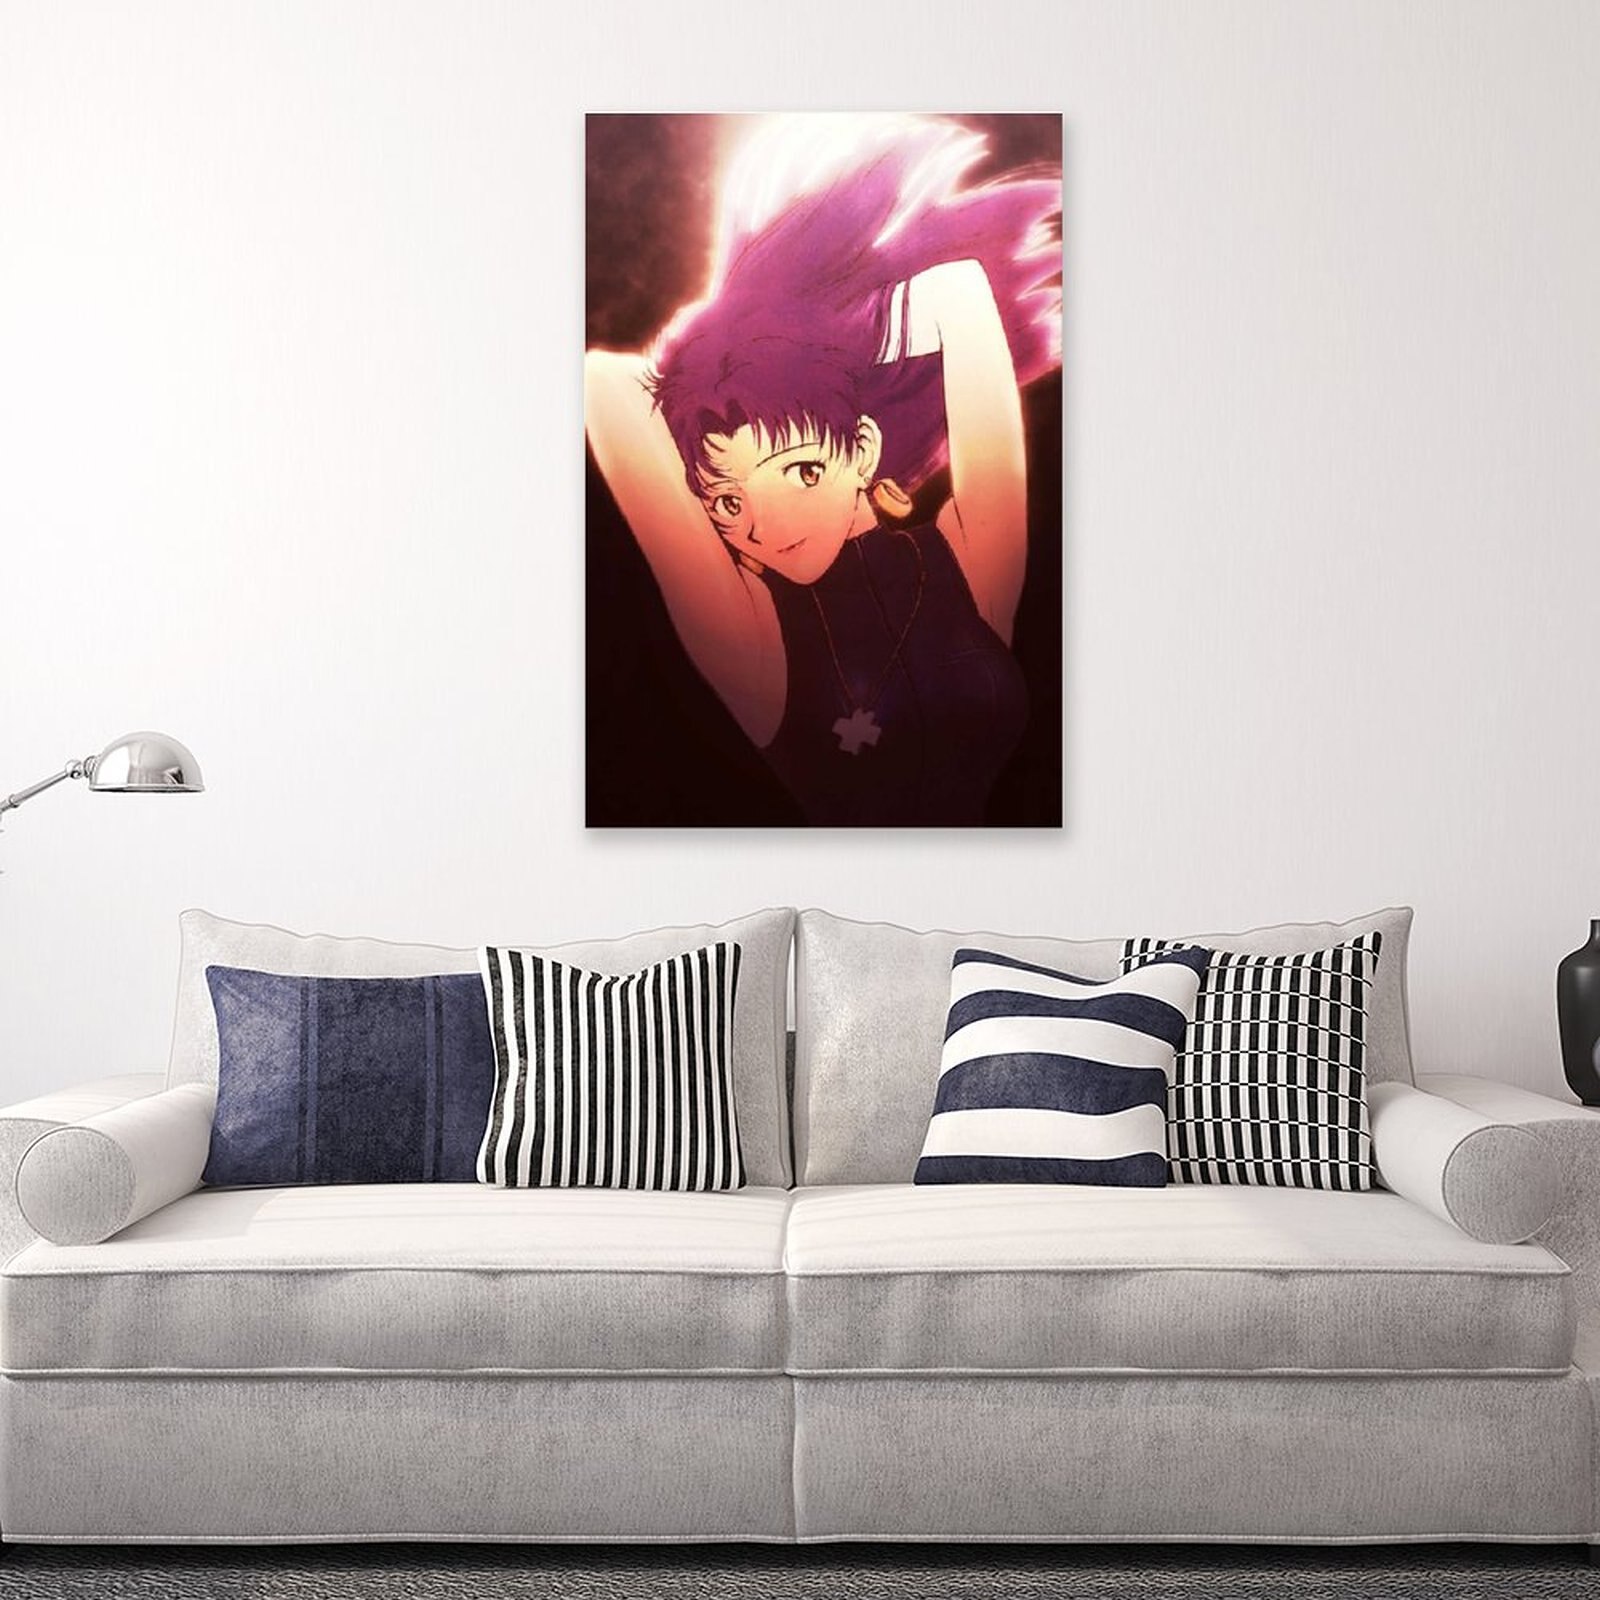 Anime Evangelion Misato GirlCanvas Painting Wall Art Posters and Prints Wall Pictures for Living Room Decoration 4 - Evangelion Shop